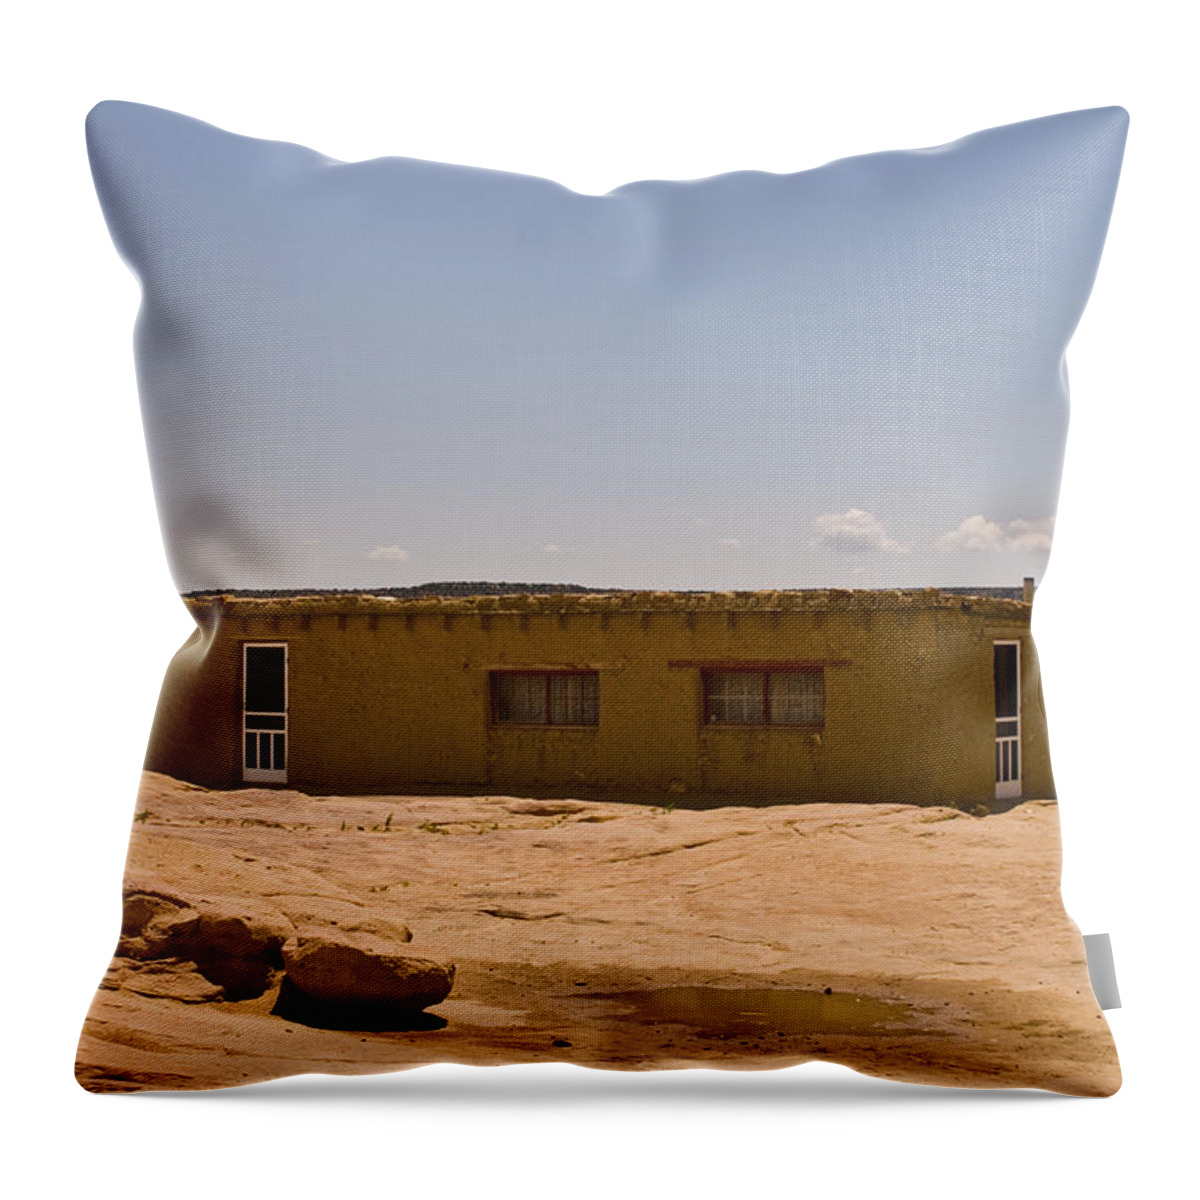  Throw Pillow featuring the photograph Pueblo Home by James Gay